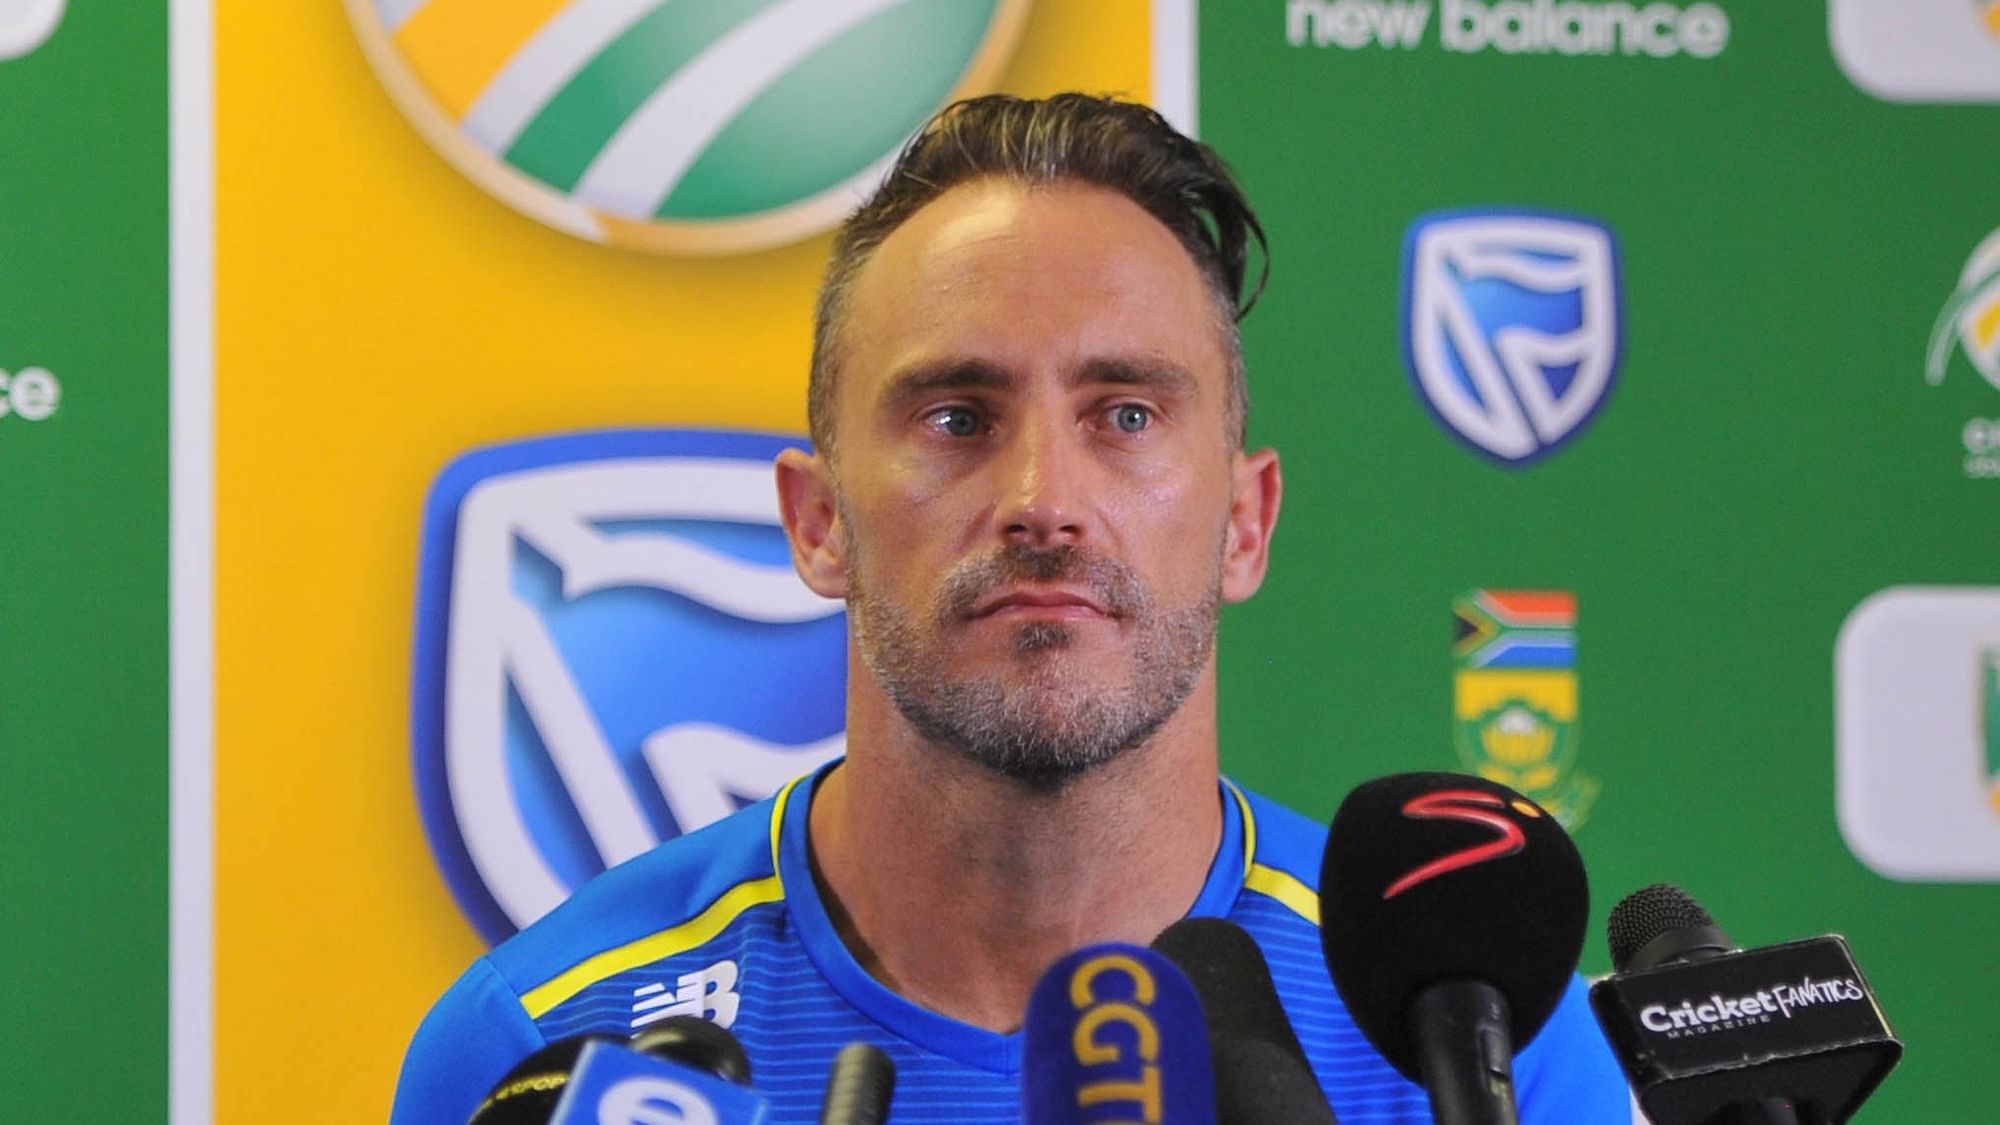 Faf du Plessis last played an ODI for South Africa in the 2019 World Cup.